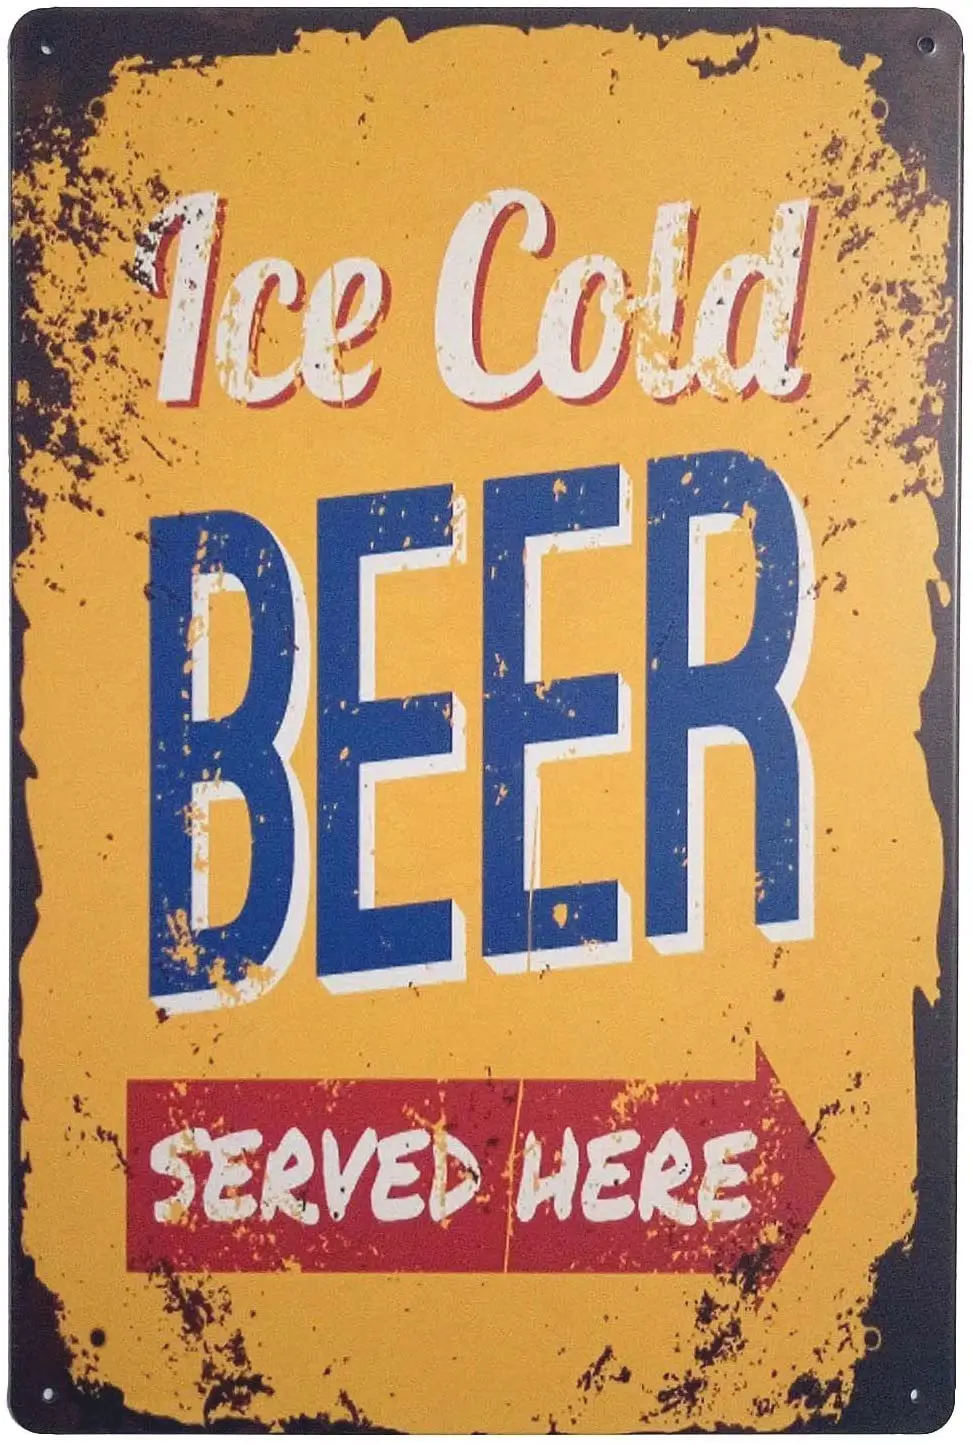 

ERLOOD ICE Cold Beer Served Here Retro Vintage Tin Sign 12" X 8" Inches